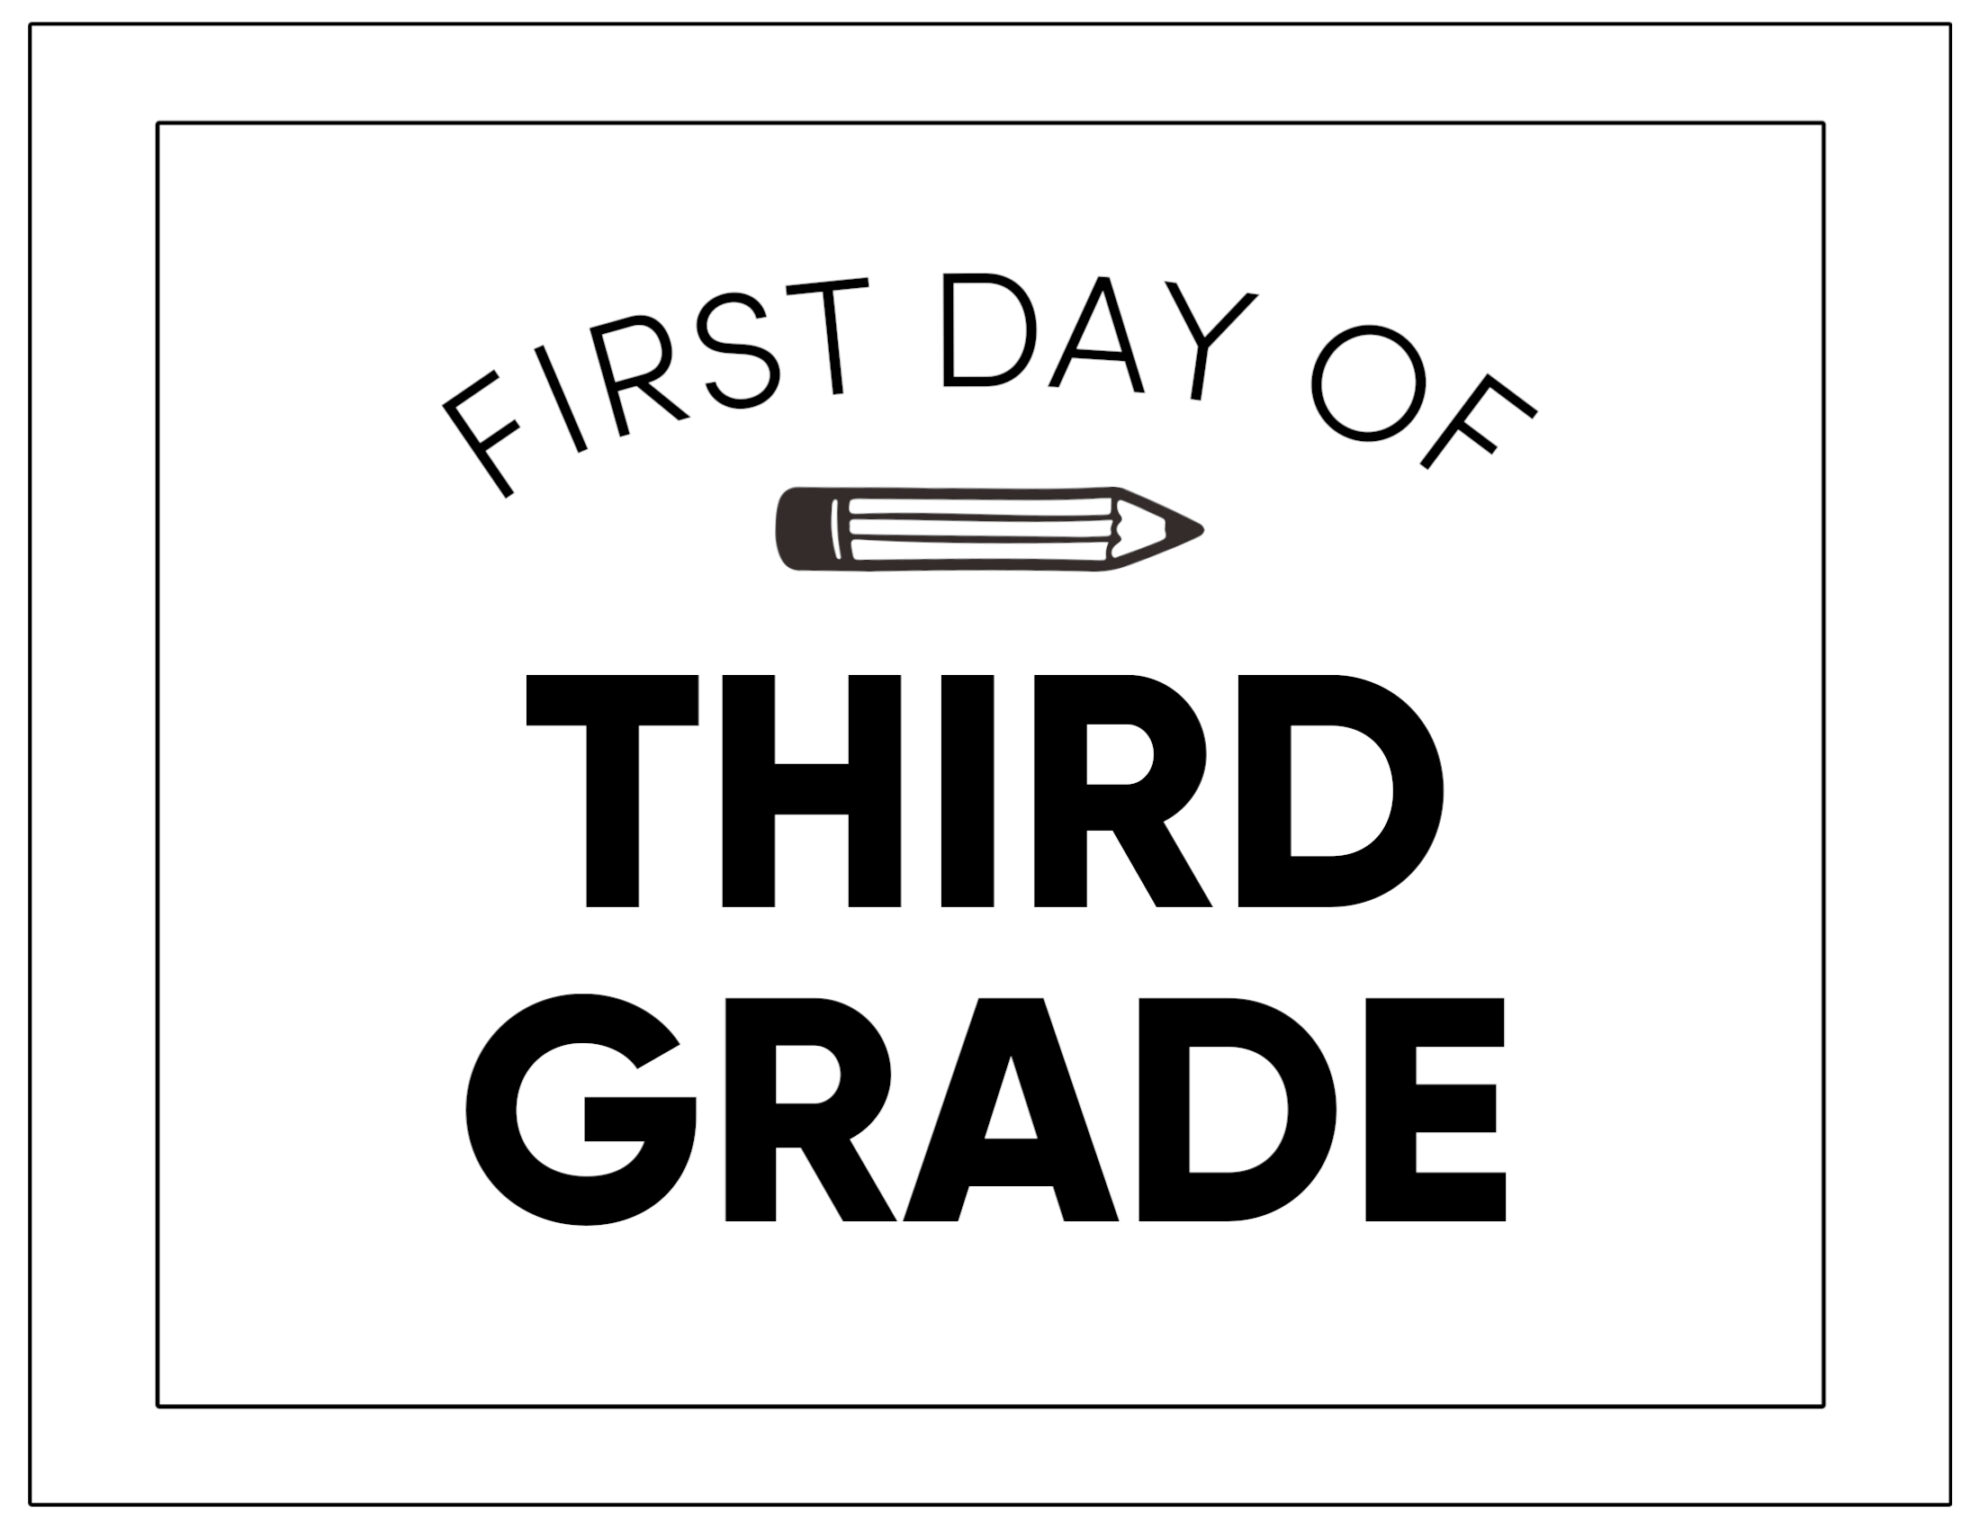 Printable First Day of School Signs Paper Trail Design